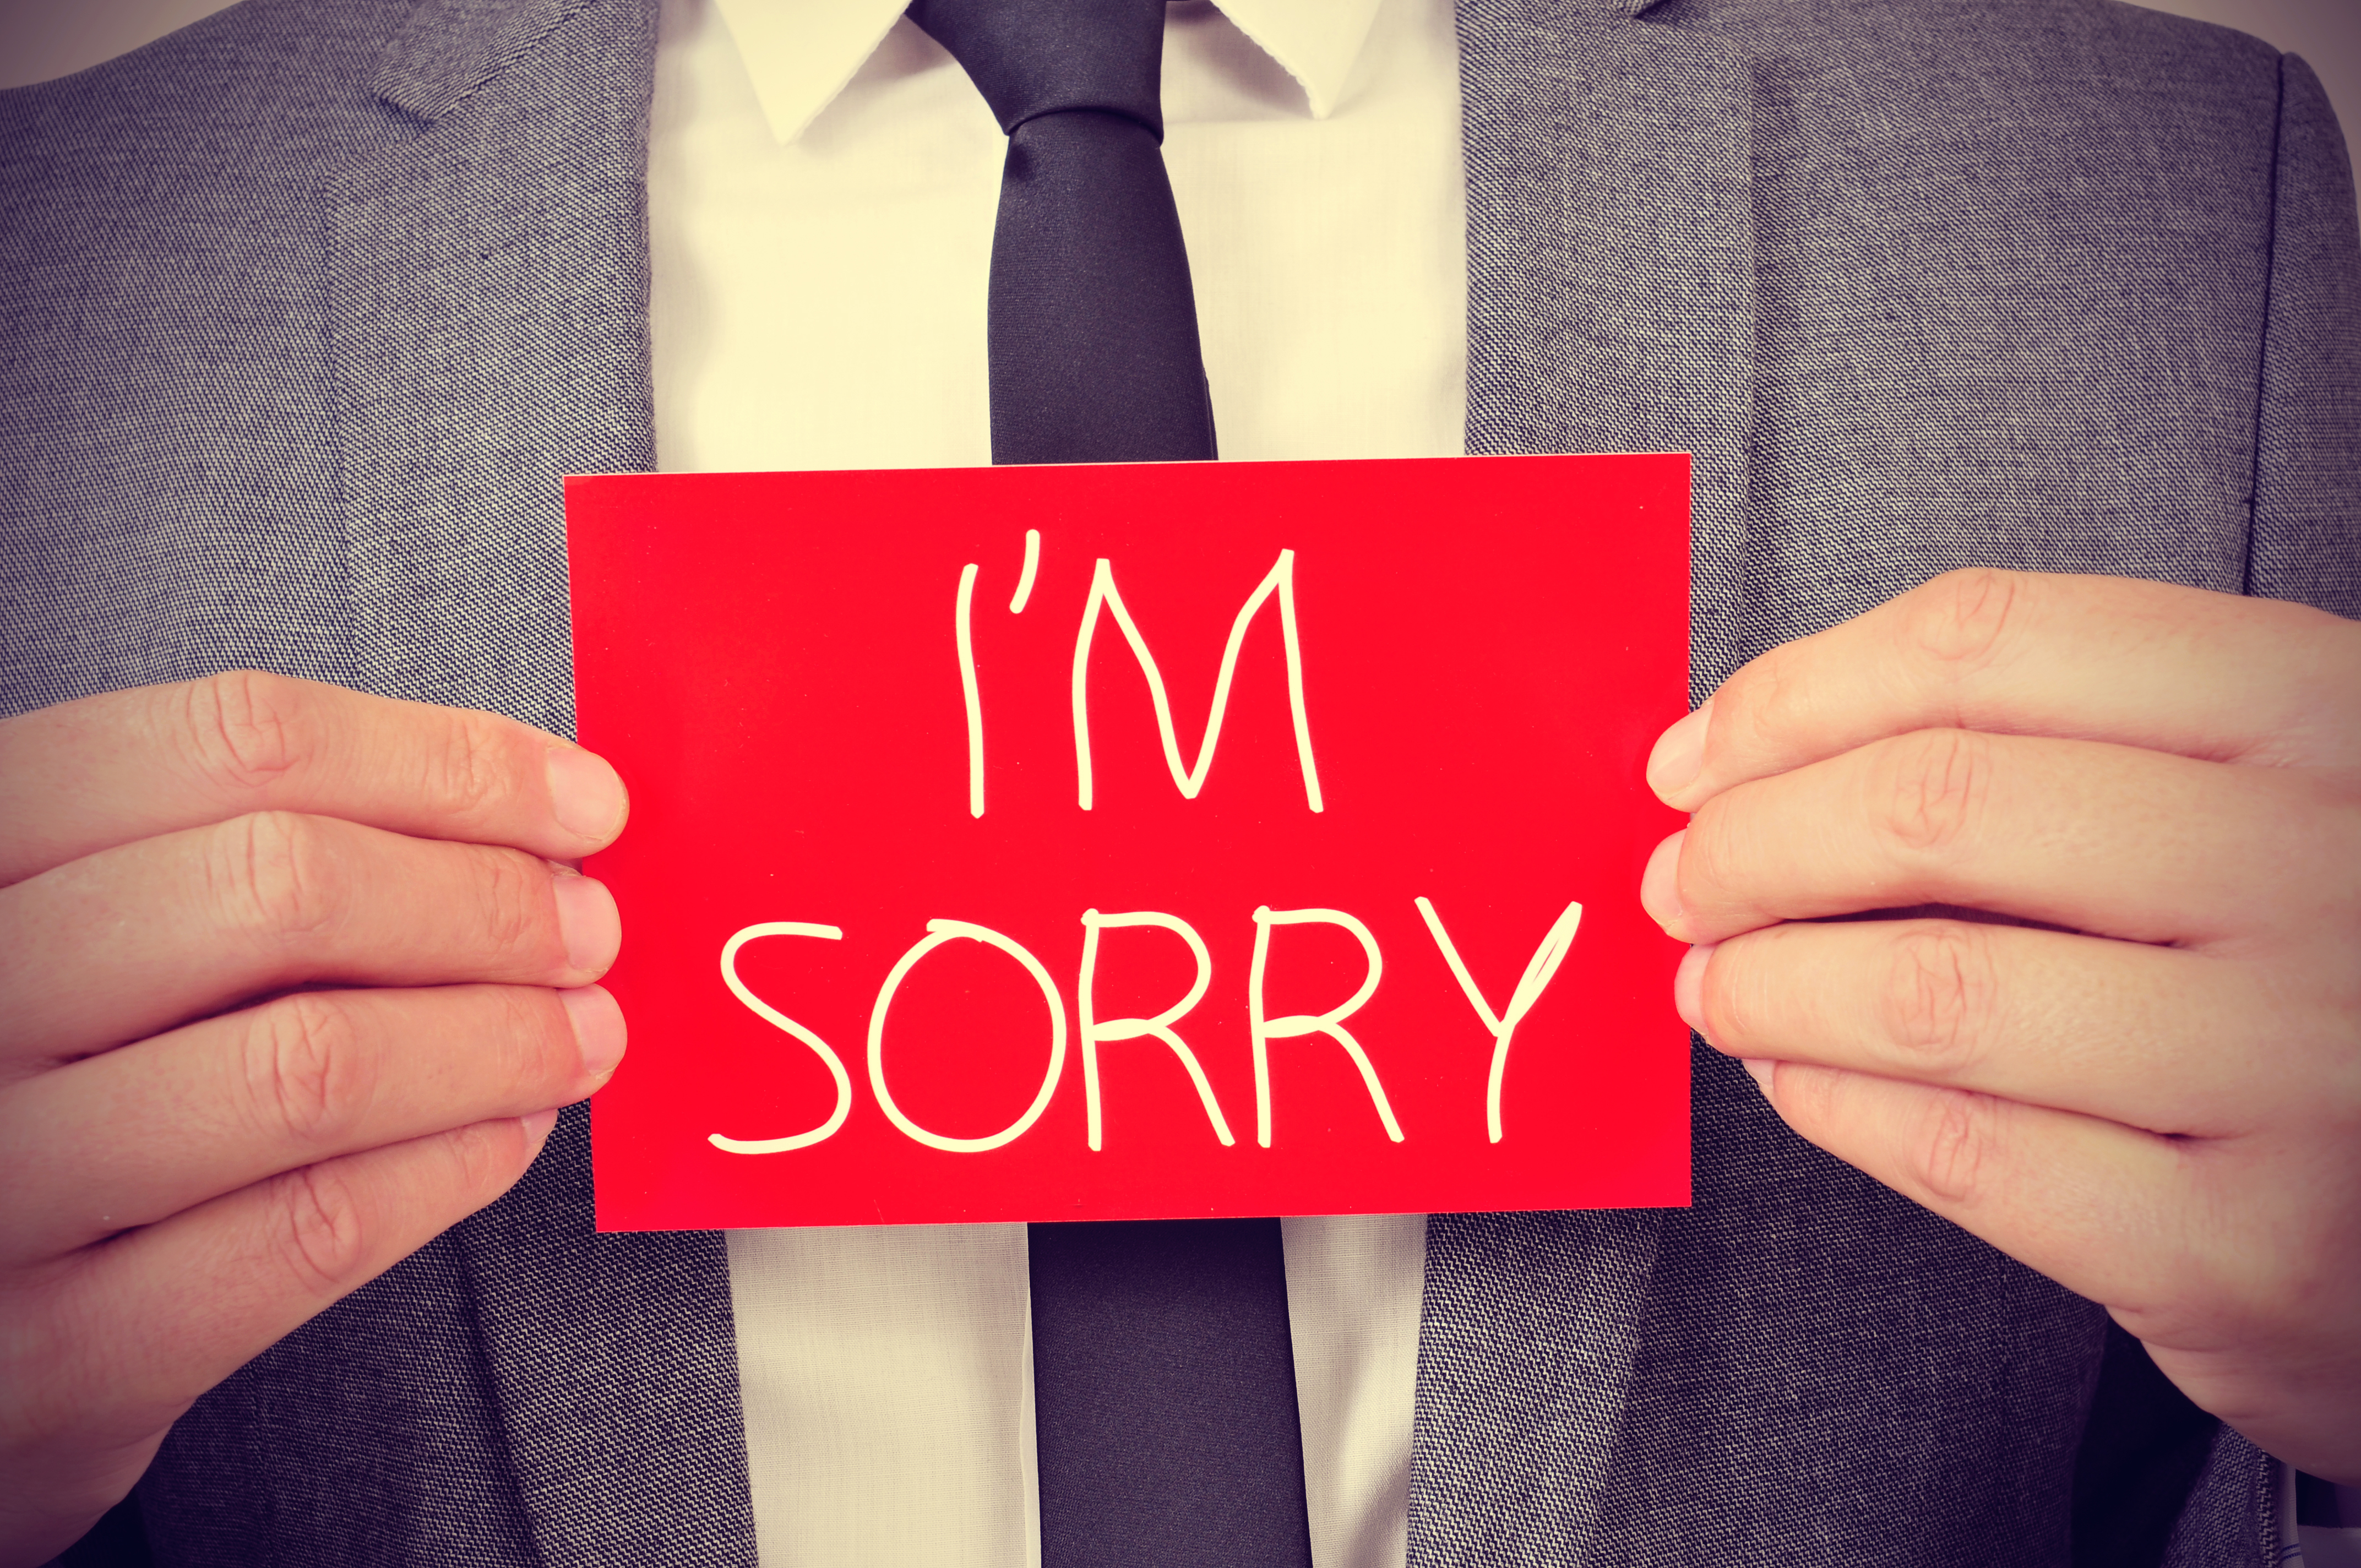 man with an apology note | Shutterstock